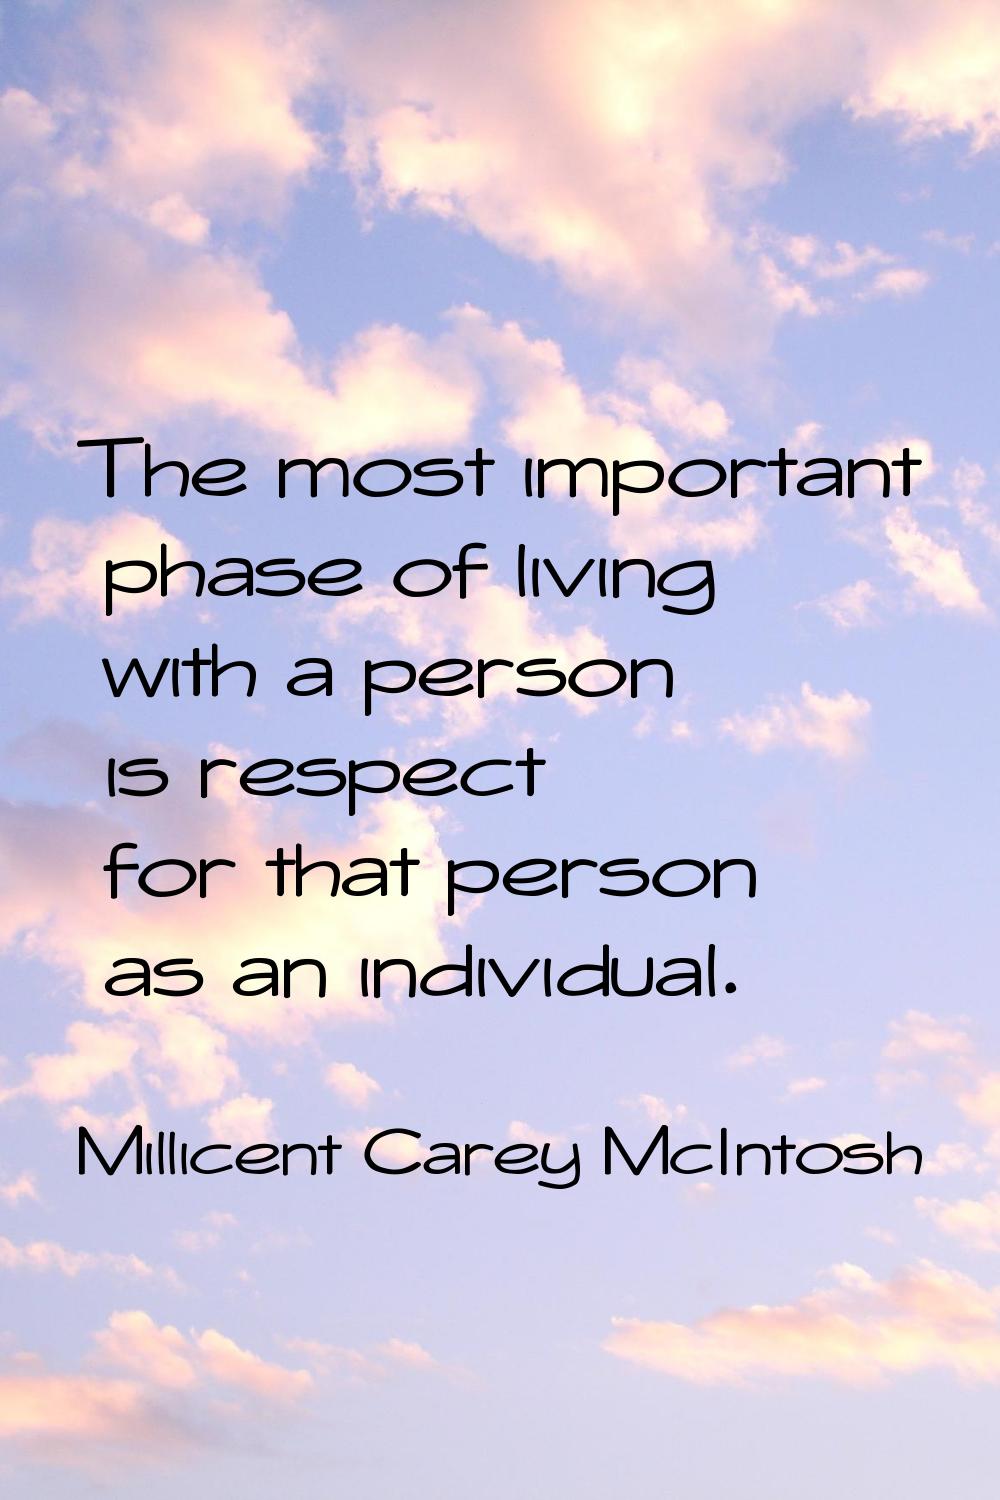 The most important phase of living with a person is respect for that person as an individual.